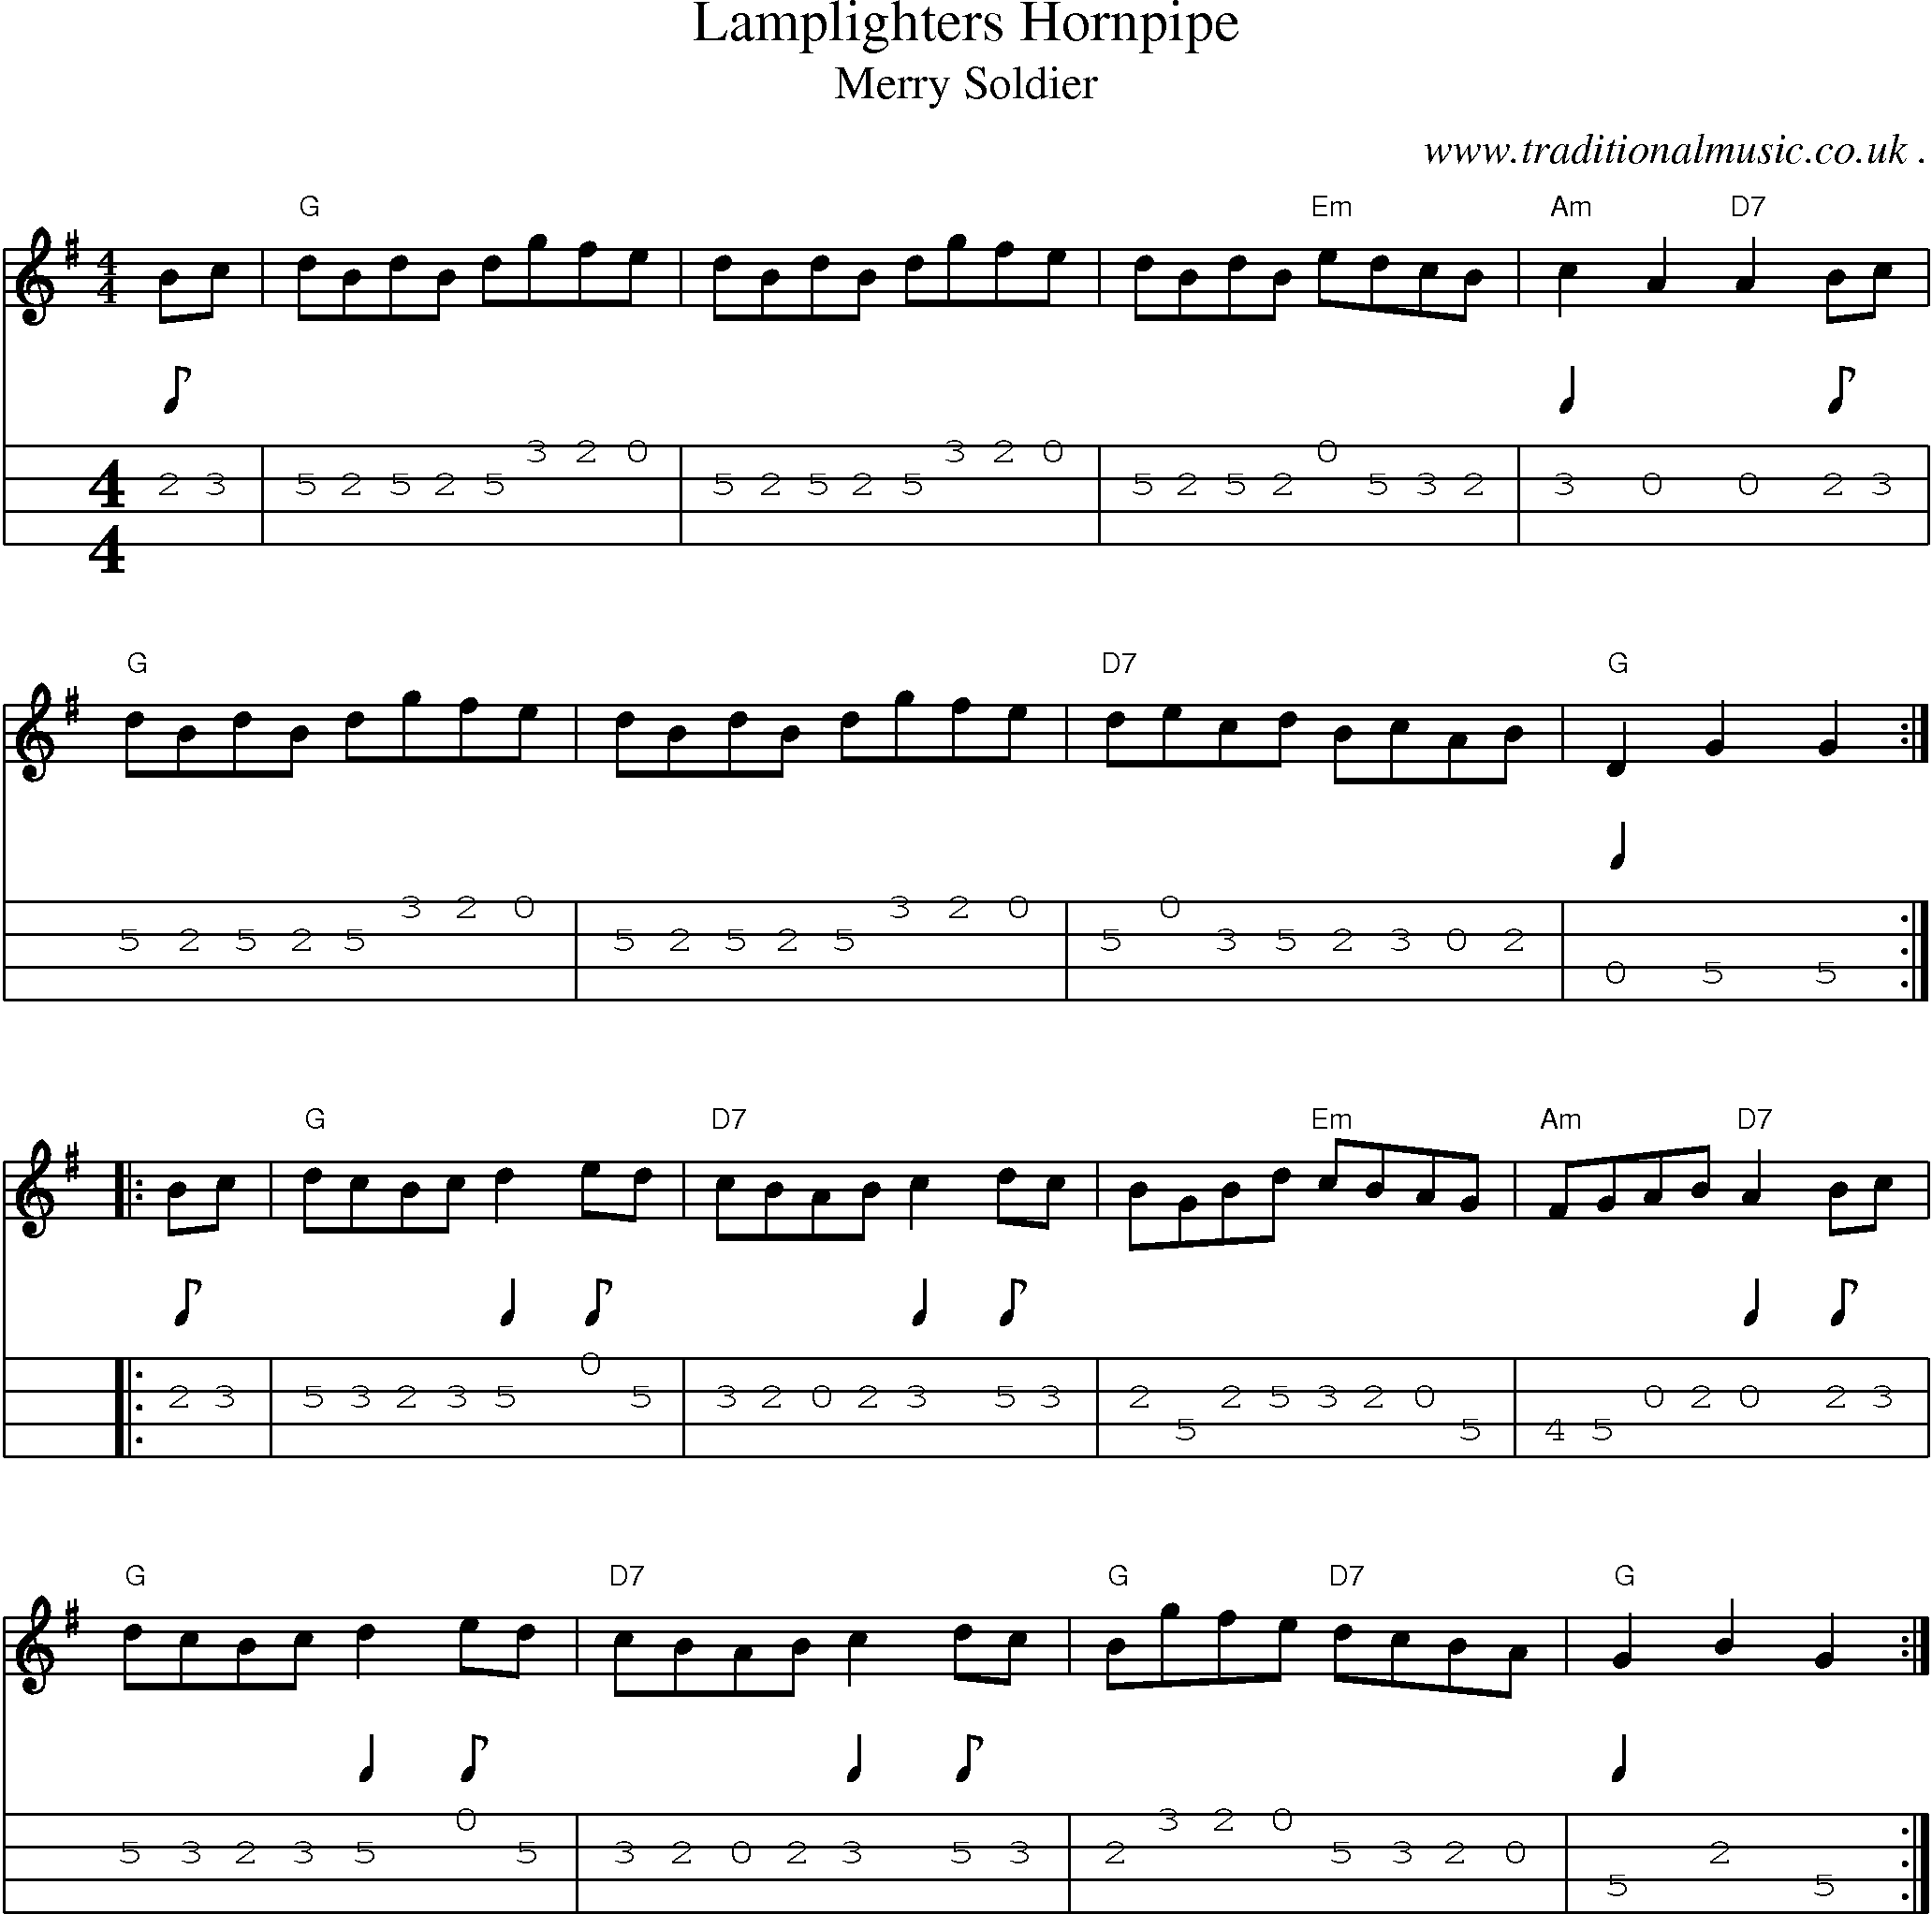 Music Score and Guitar Tabs for Lamplighters Hornpipe